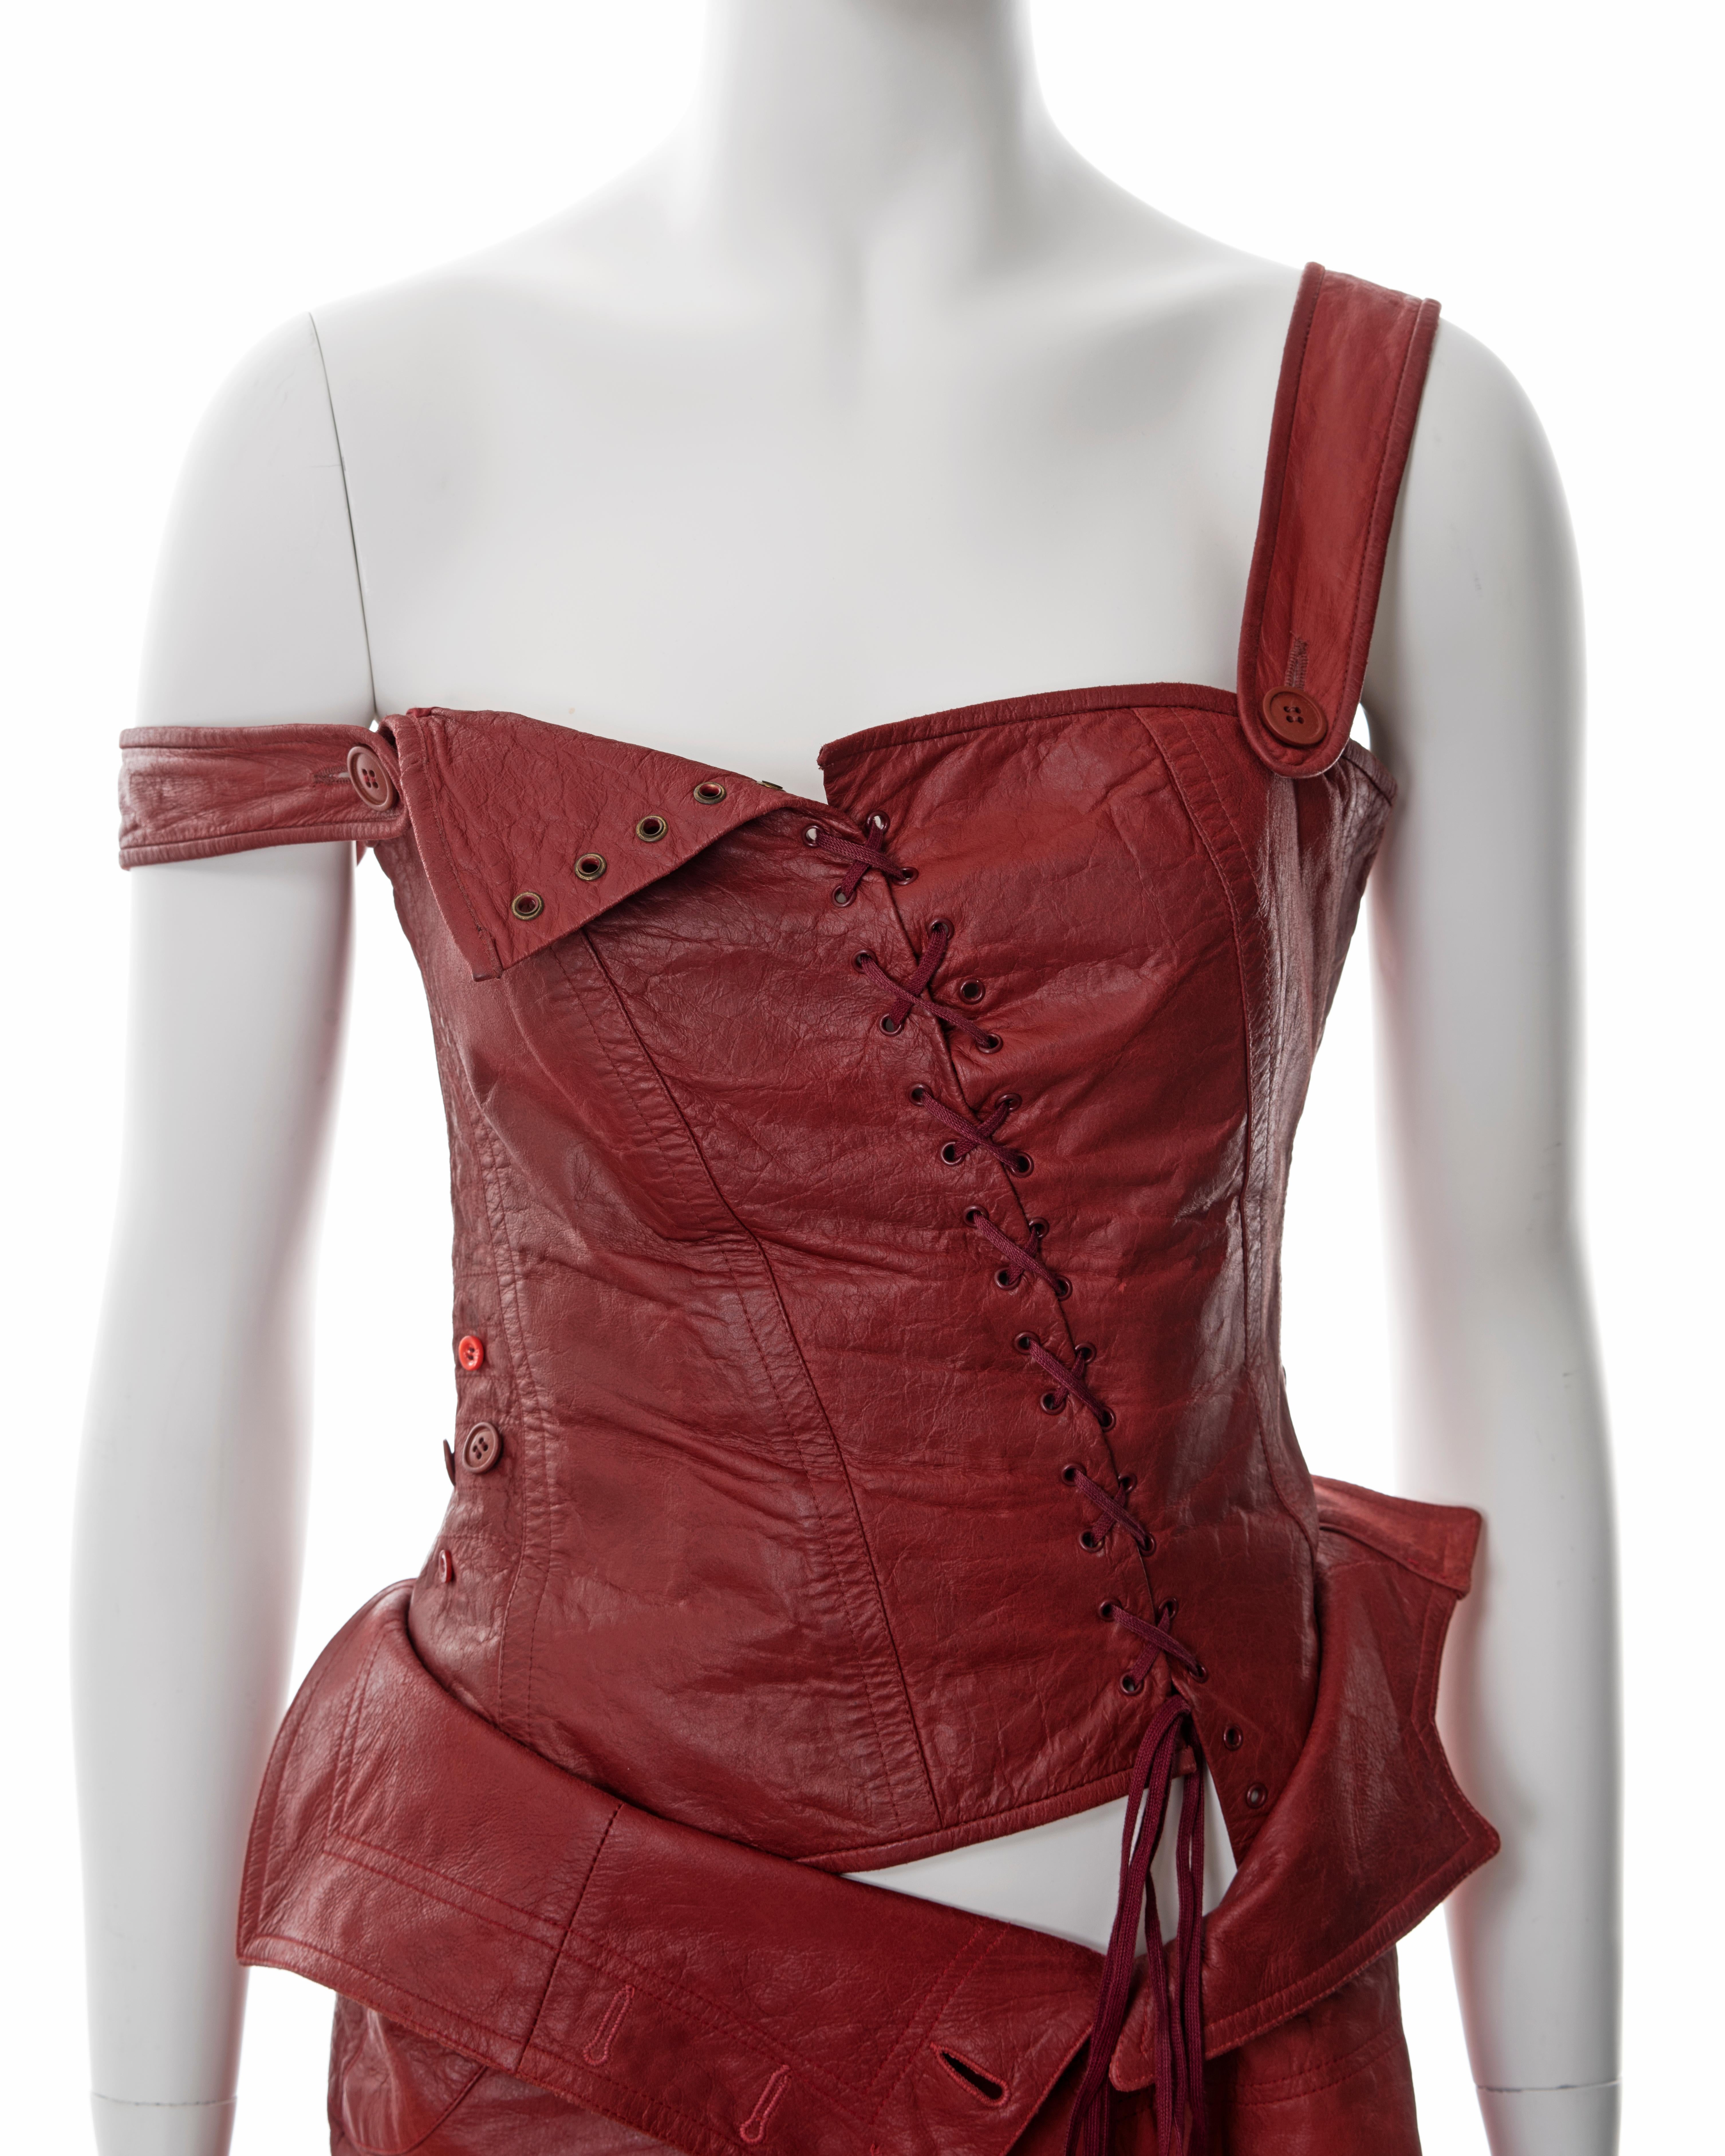 Christian Dior by John Galliano red lambskin leather corset and skirt, ss 2000 1